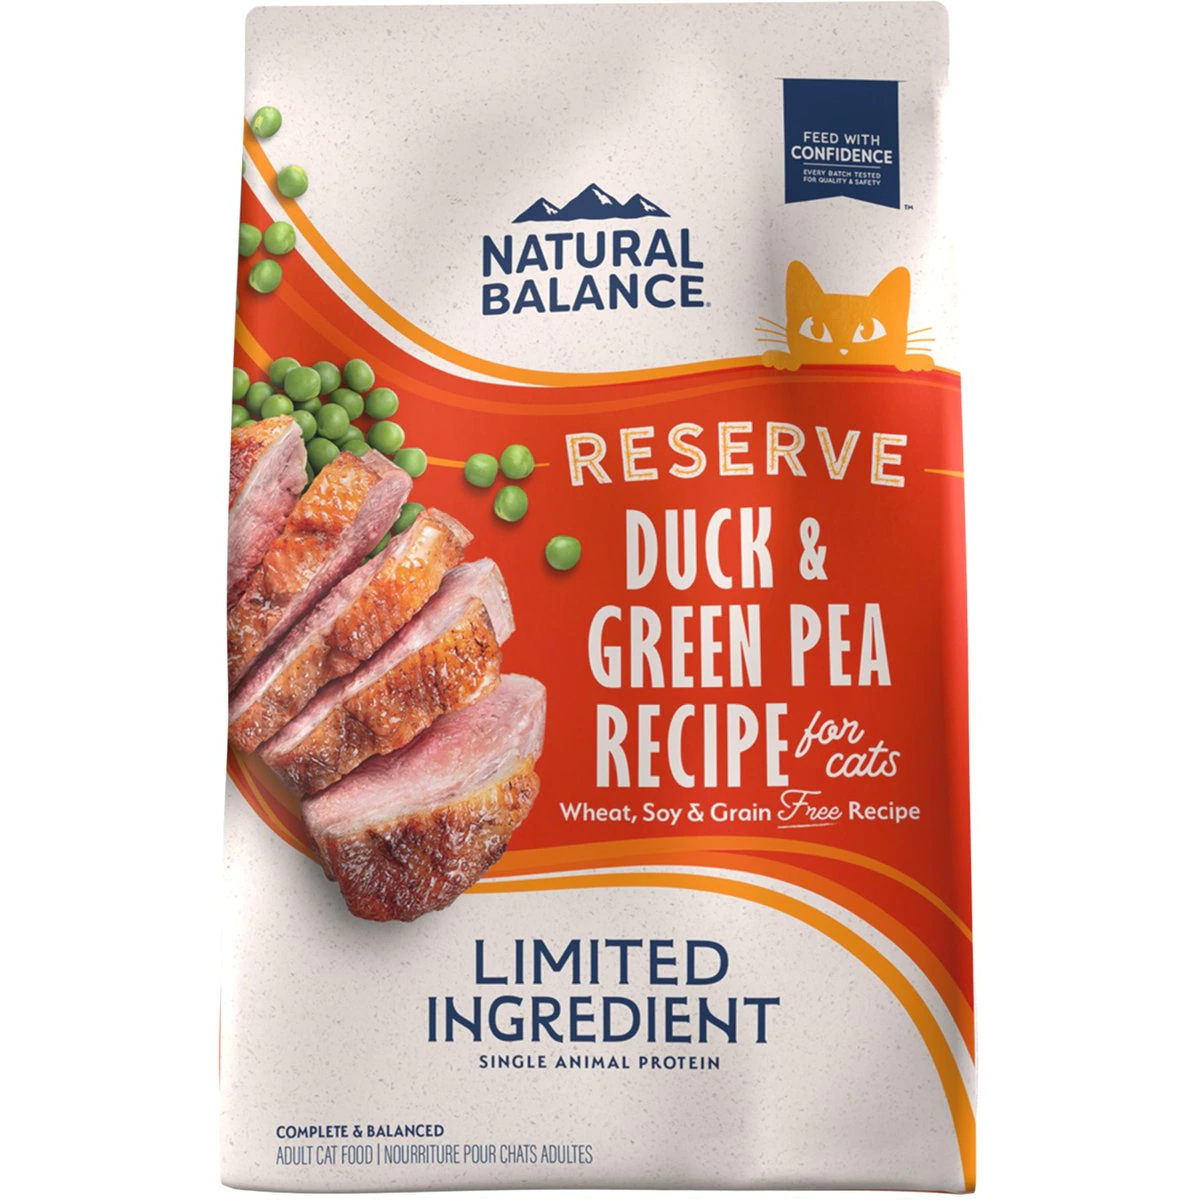 Natural Balance Limited Ingredient Grain-Free Duck & Green Pea Recipe Dry Cat Food